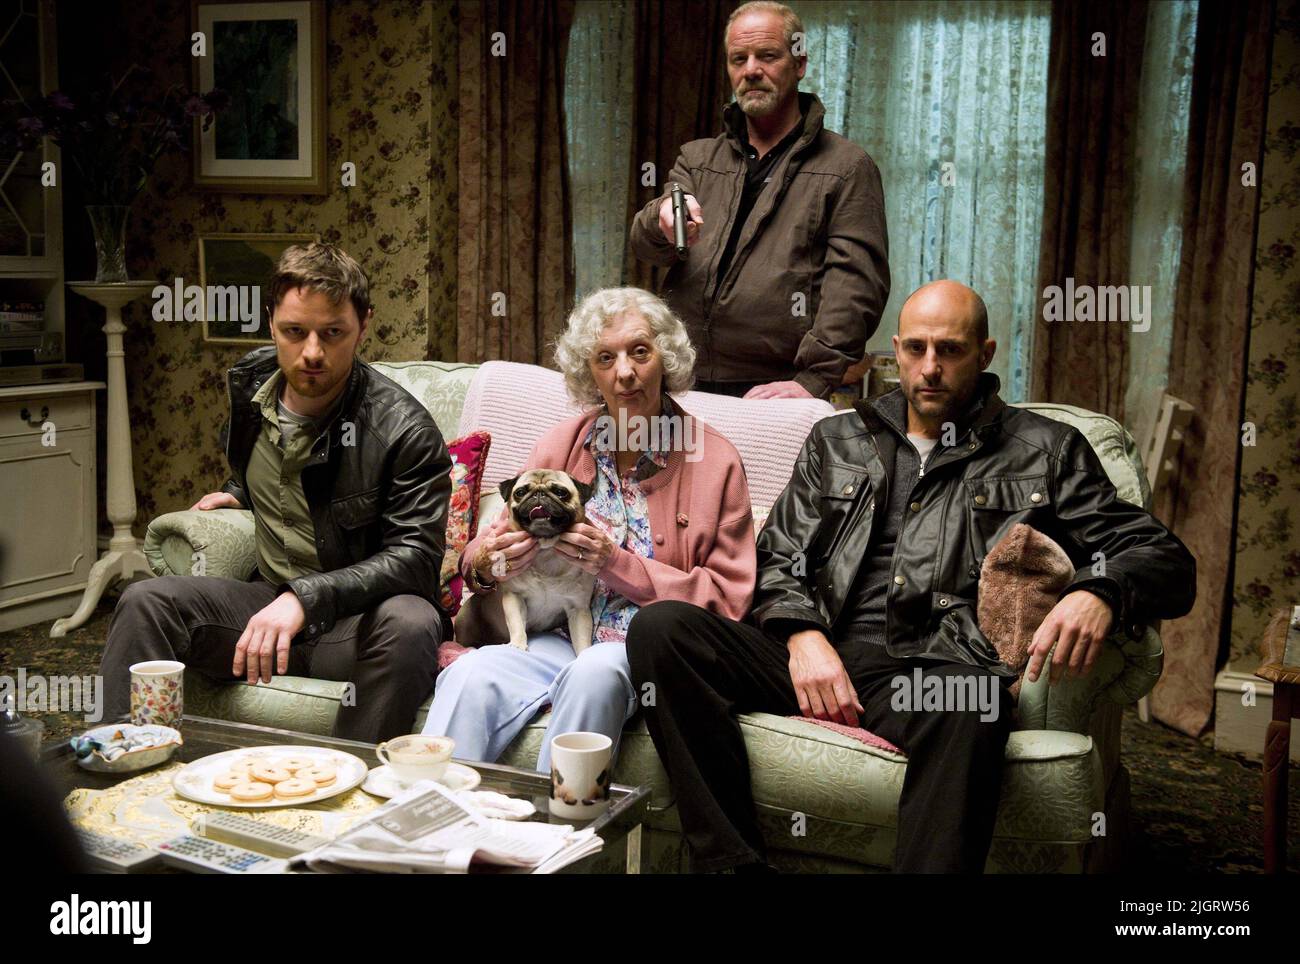 JAMES MCAVOY, RUTH SHEEN, PETER MULLAN, MARK STRONG, WELCOME TO THE PUNCH, 2013 Stock Photo